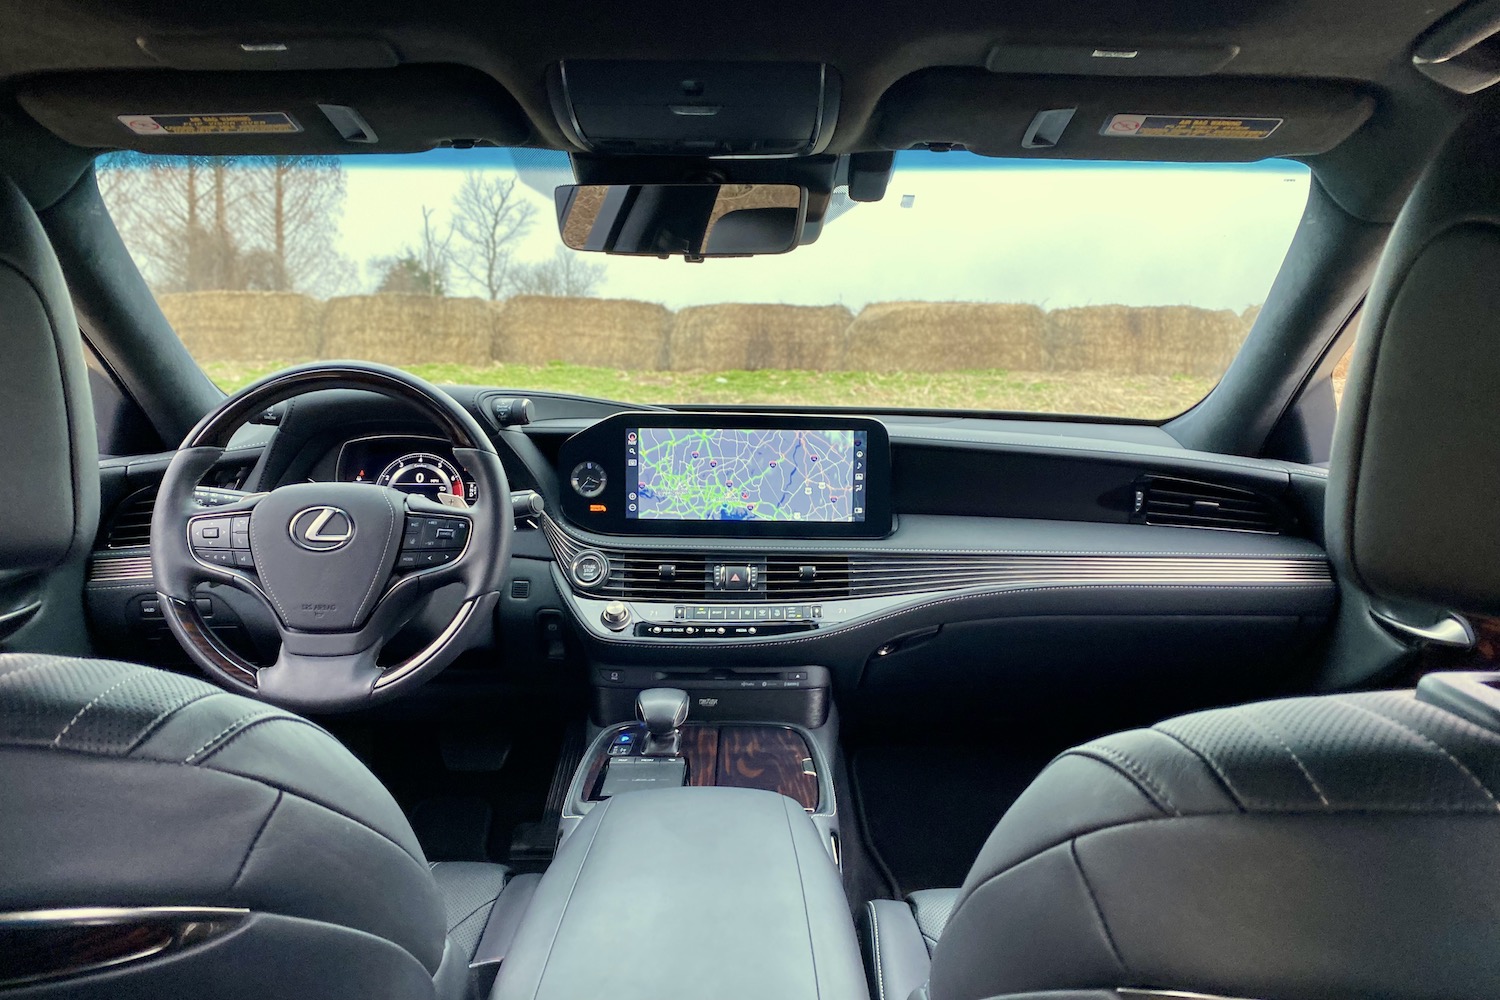 The dashboard and front seats of the 2021 Lexus LS500.